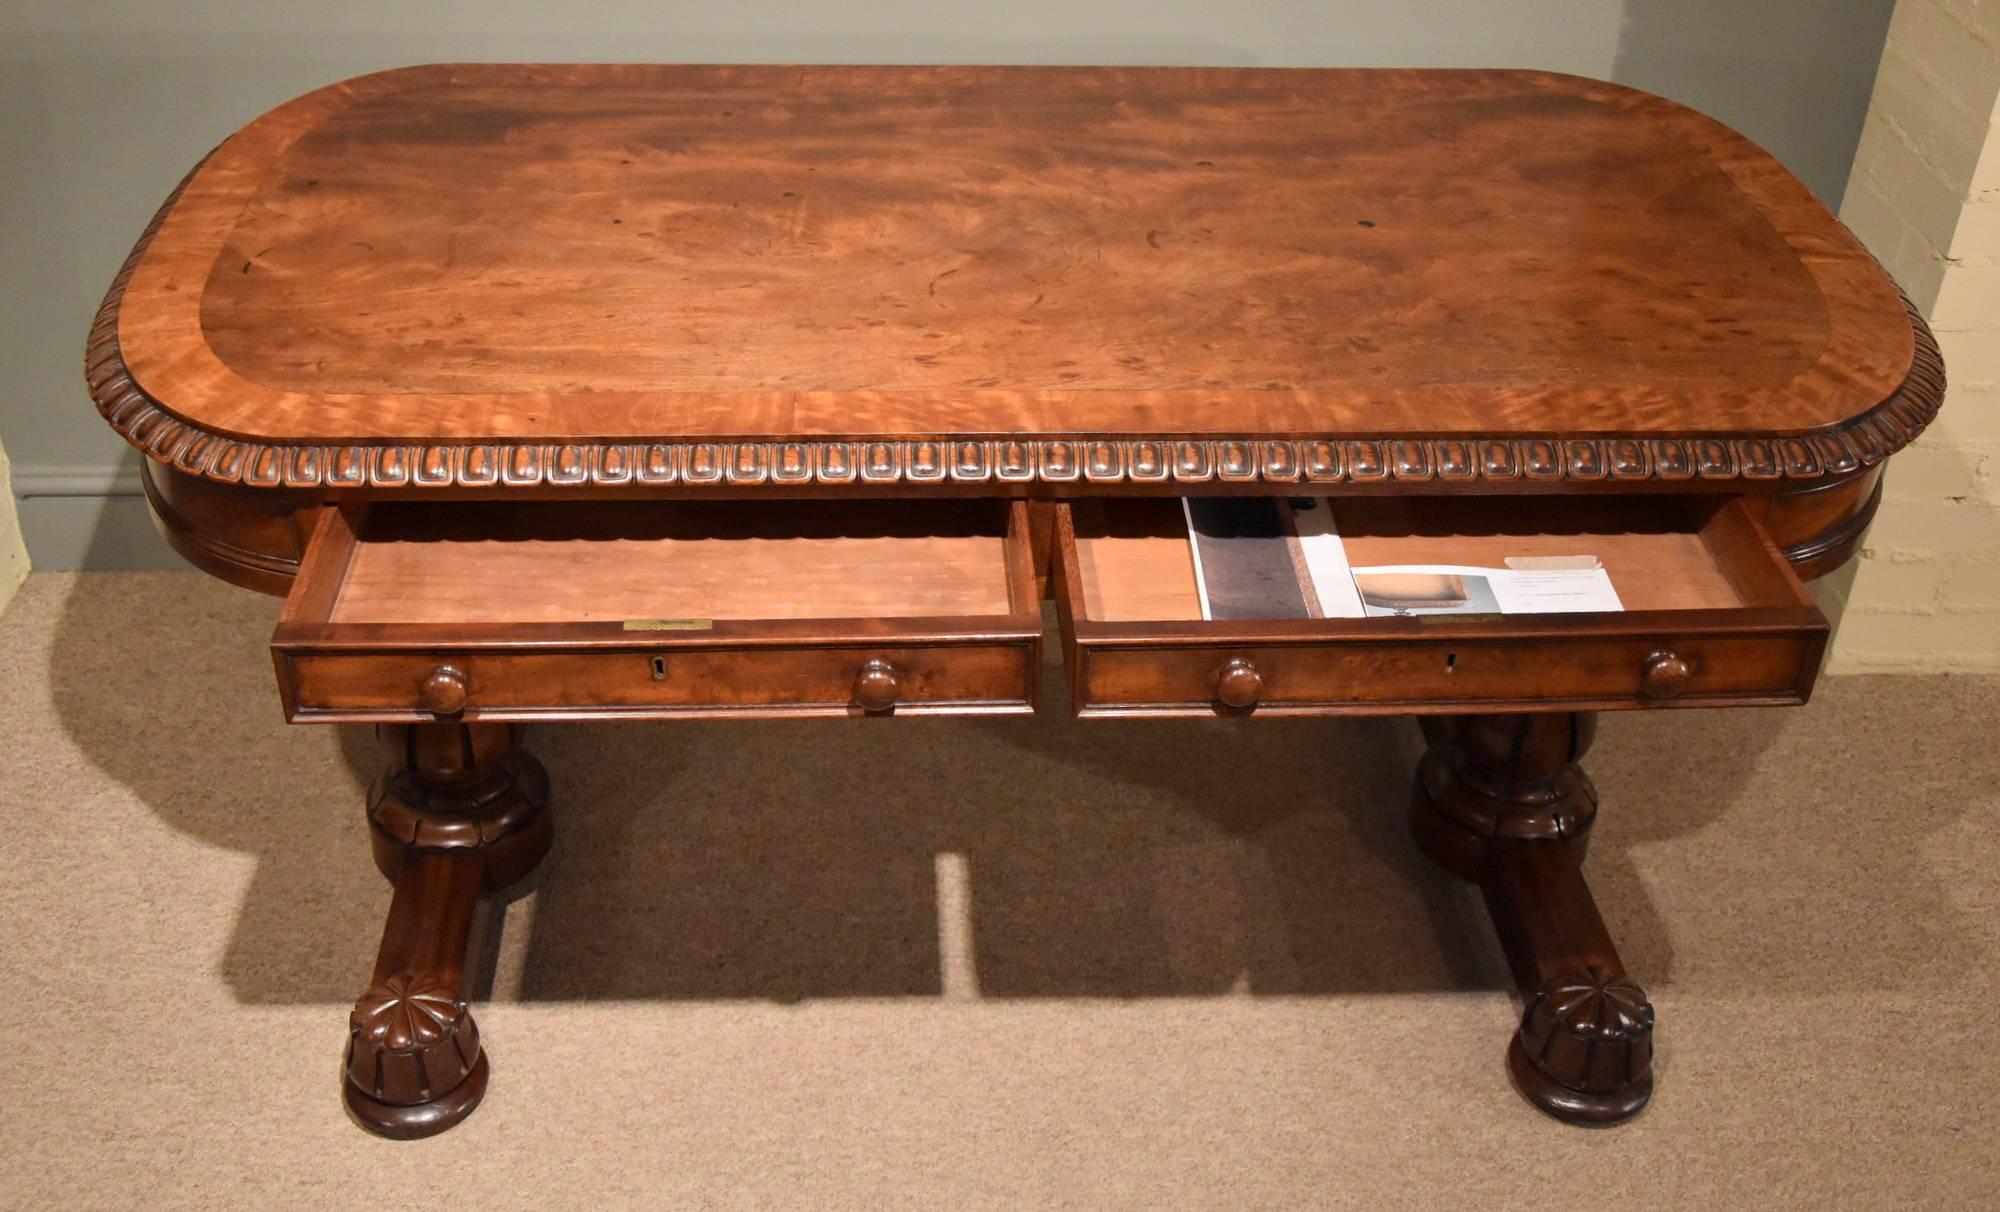 This magnificent table was made by William and Gibton and stamped in the drawer 'Williams and Gibton 14116. The highly successful Dublin firm of Mack, Williams and Gibton whose furniture was often stamped with a series of number and sometimes also